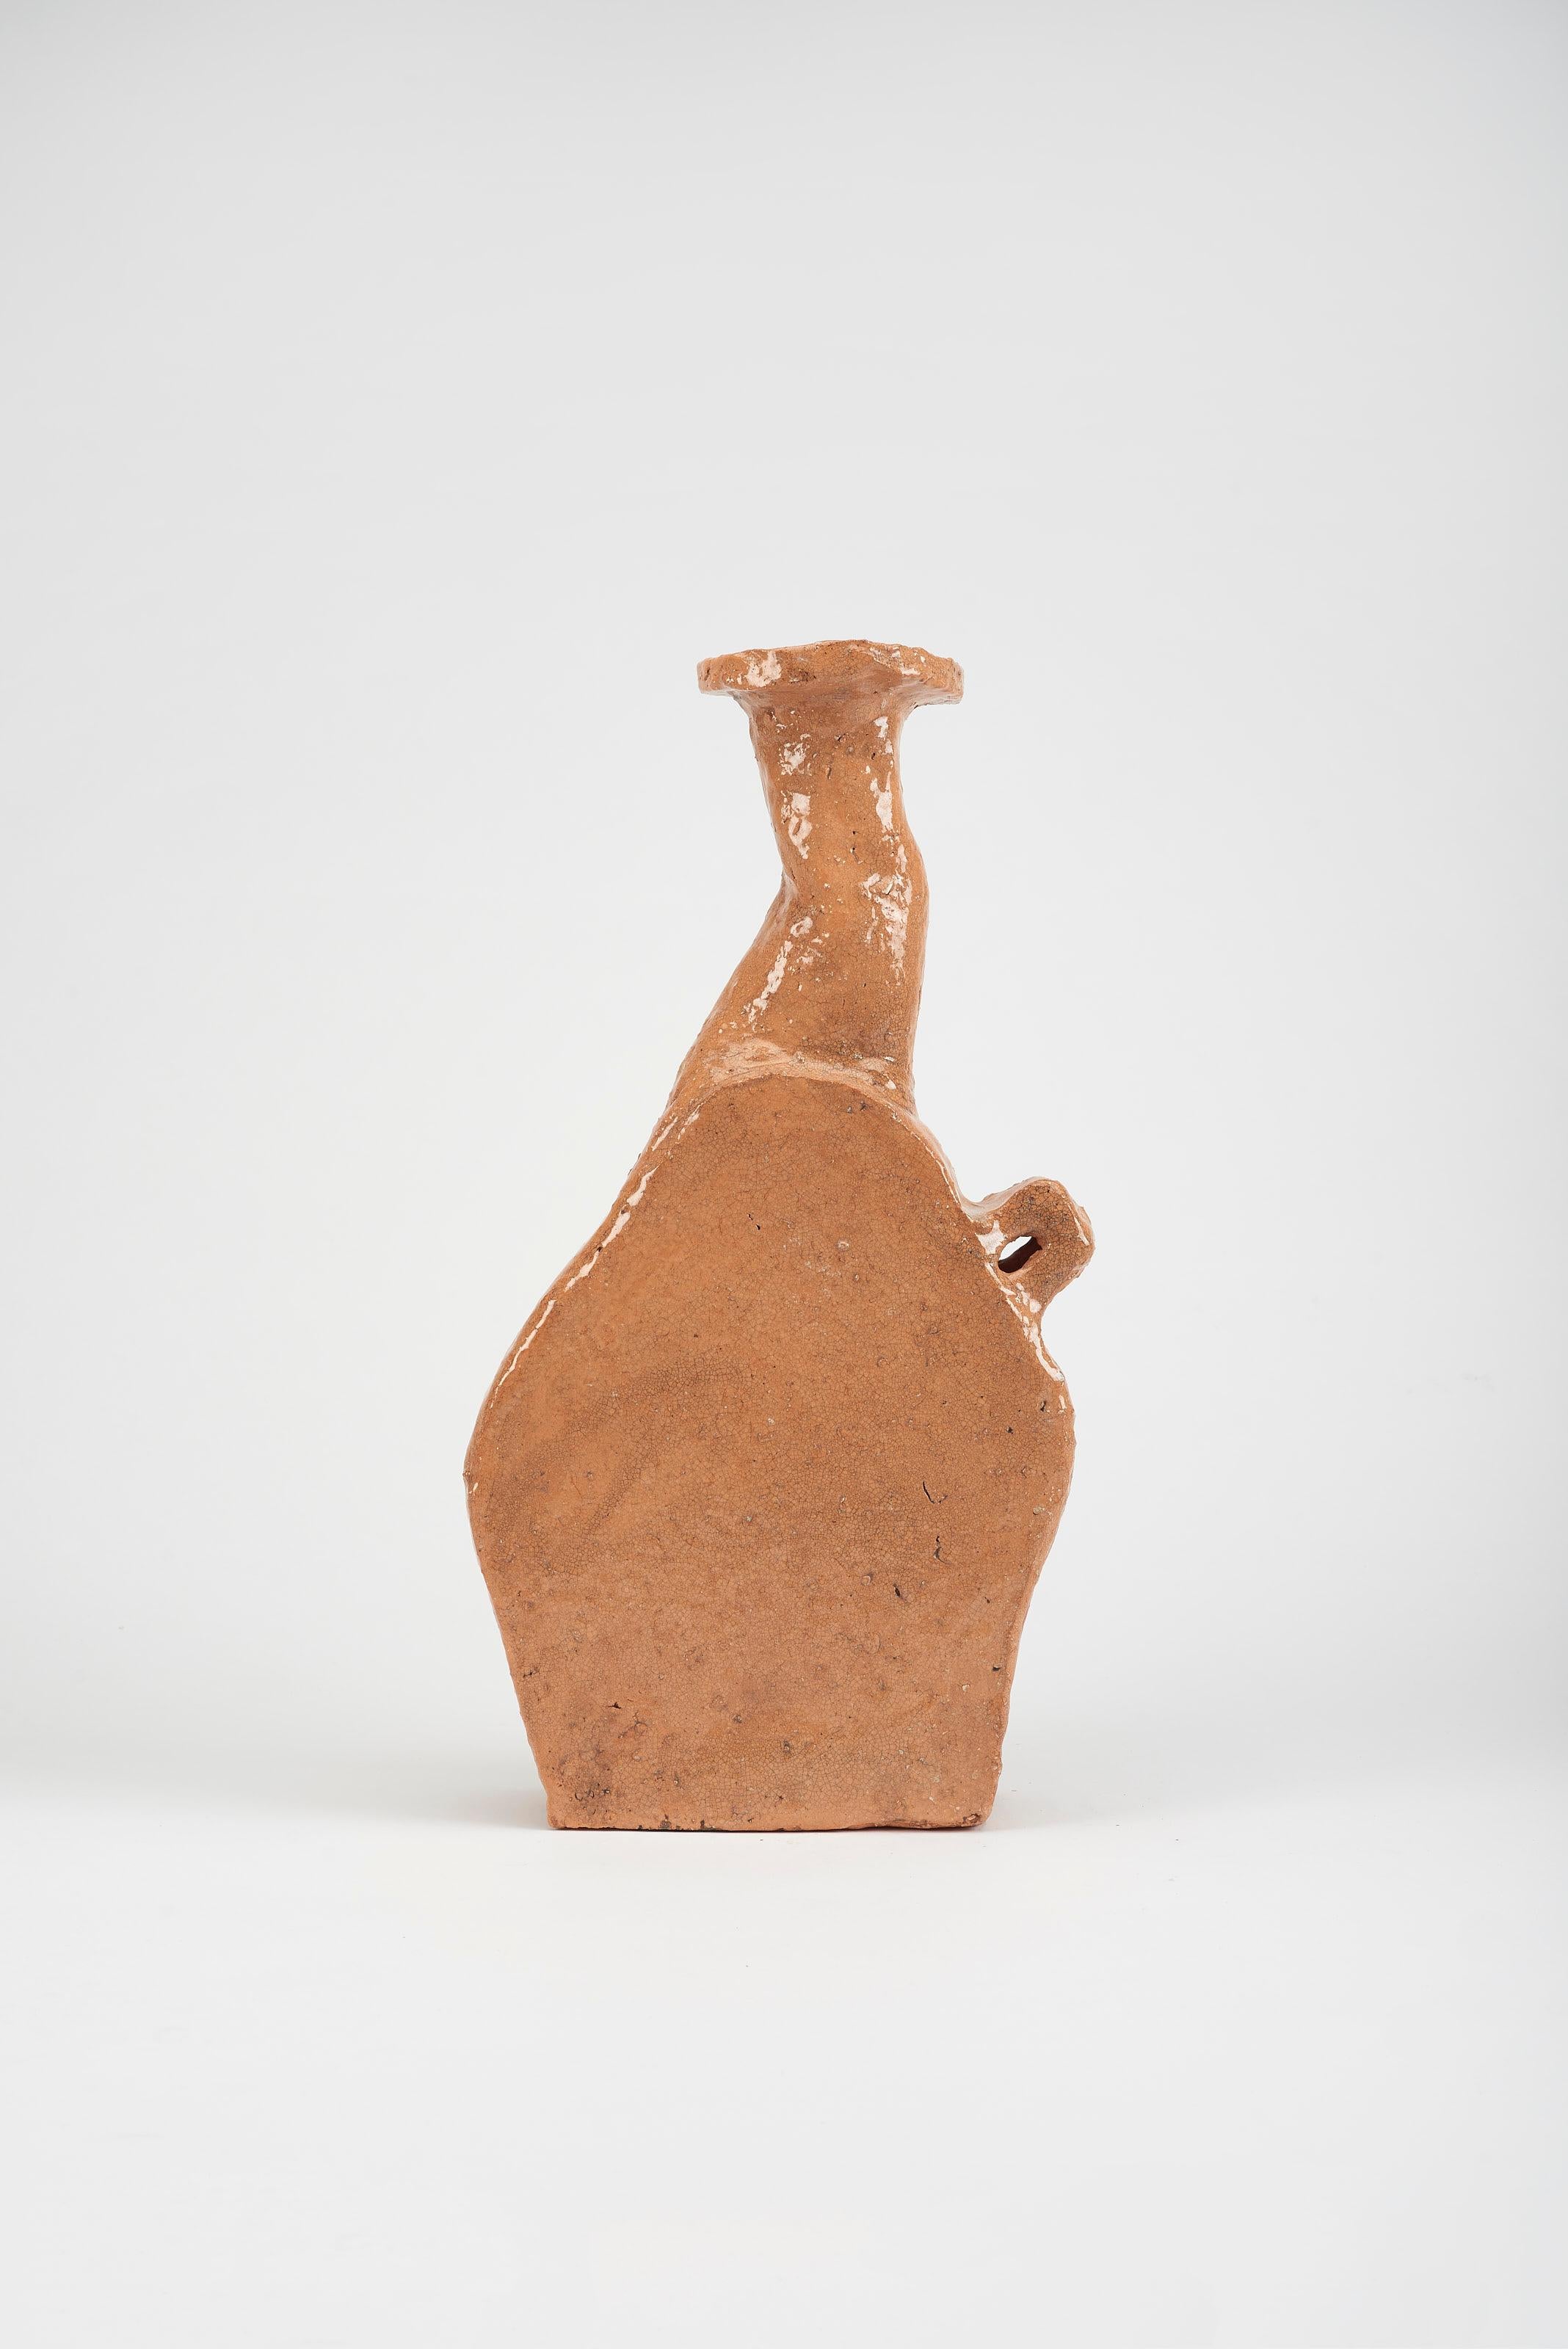 KItu Small Vase by Willem Van Hooff
Dimensions: W 24 x D 7 x H 35 cm (Dimensions may vary as pieces are hand-made and might present slight variations in sizes)
Material: Glazed Ceramics.

Core is a serie of vessels. Inspired by prehistoric african